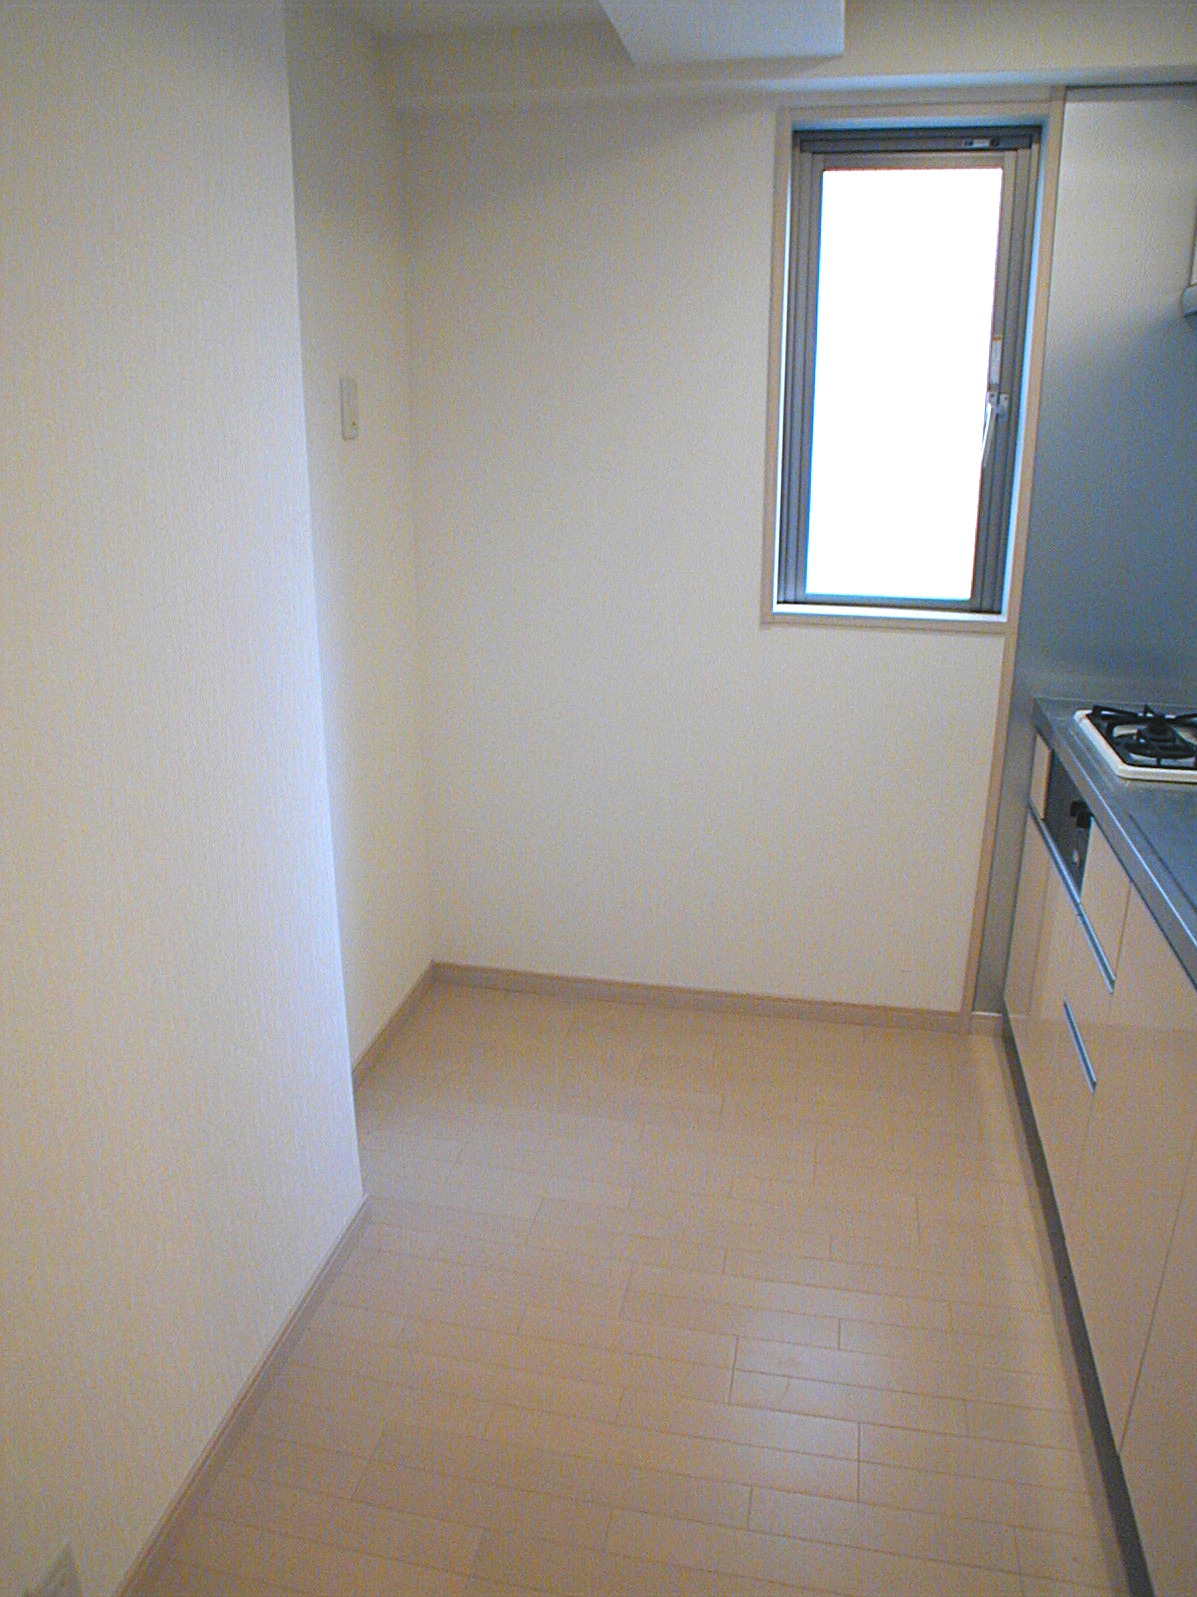 Kitchen. Such as the refrigerator and cupboard might put space! 